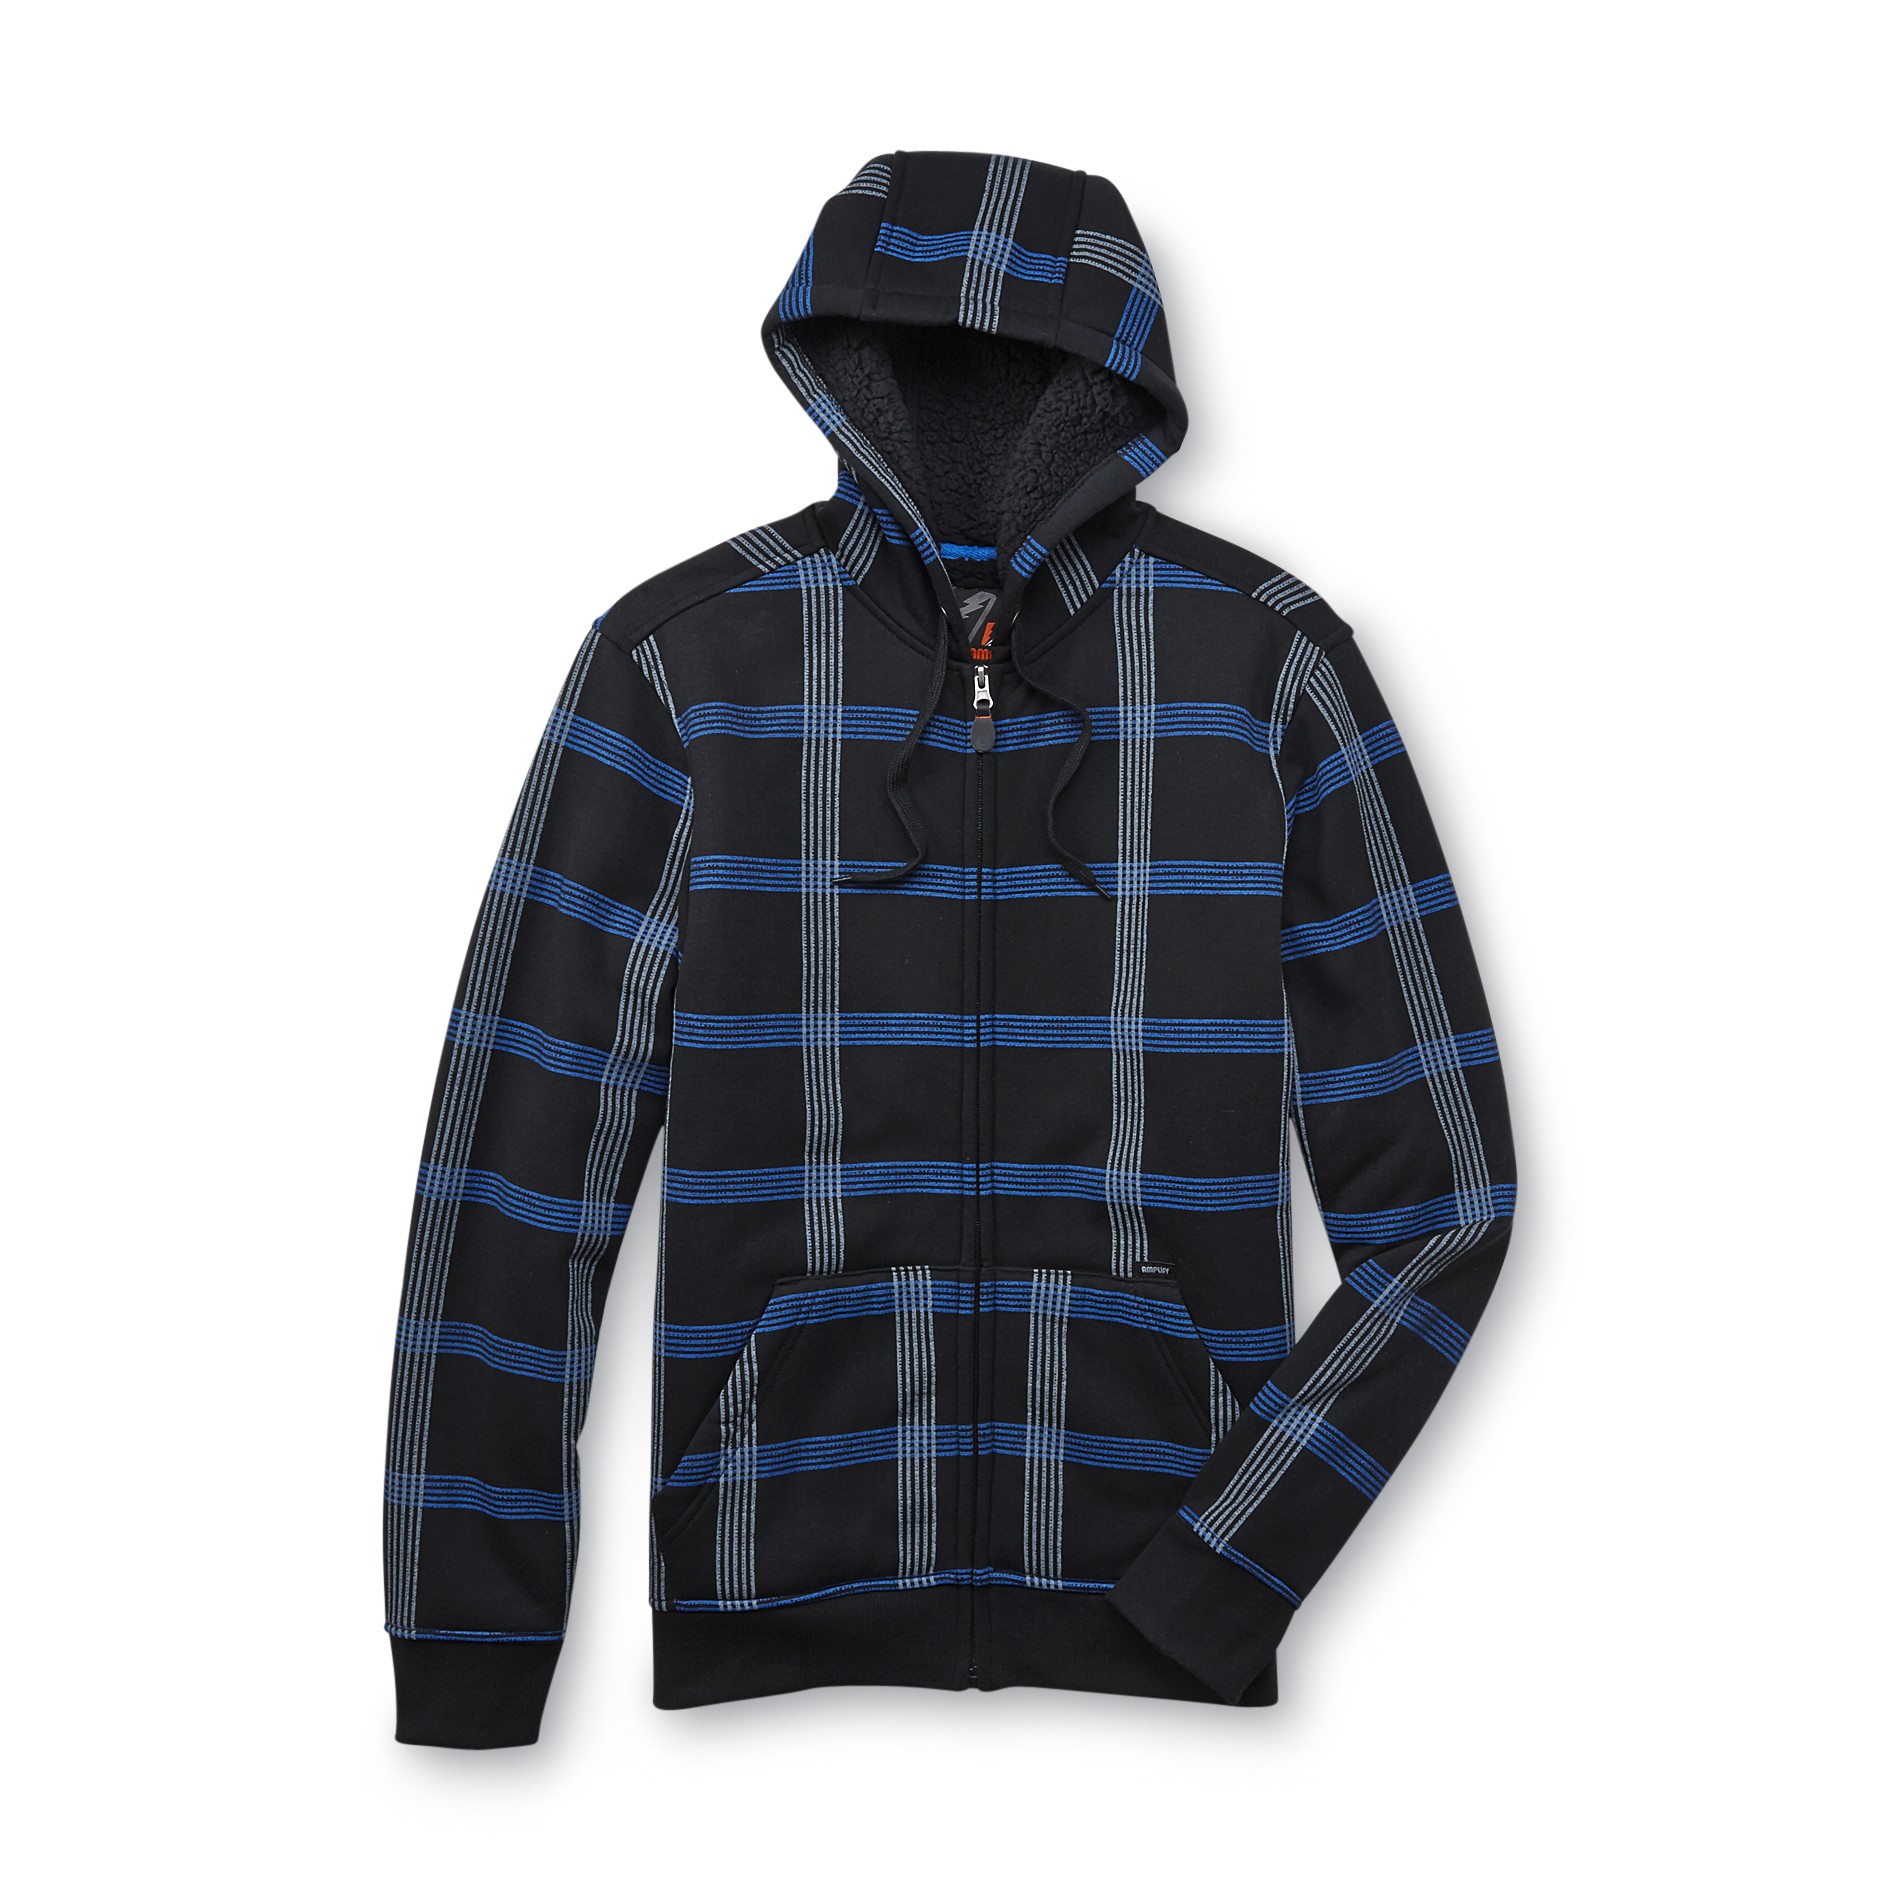 Amplify Young Men's Sherpa Hoodie Jacket - Plaid